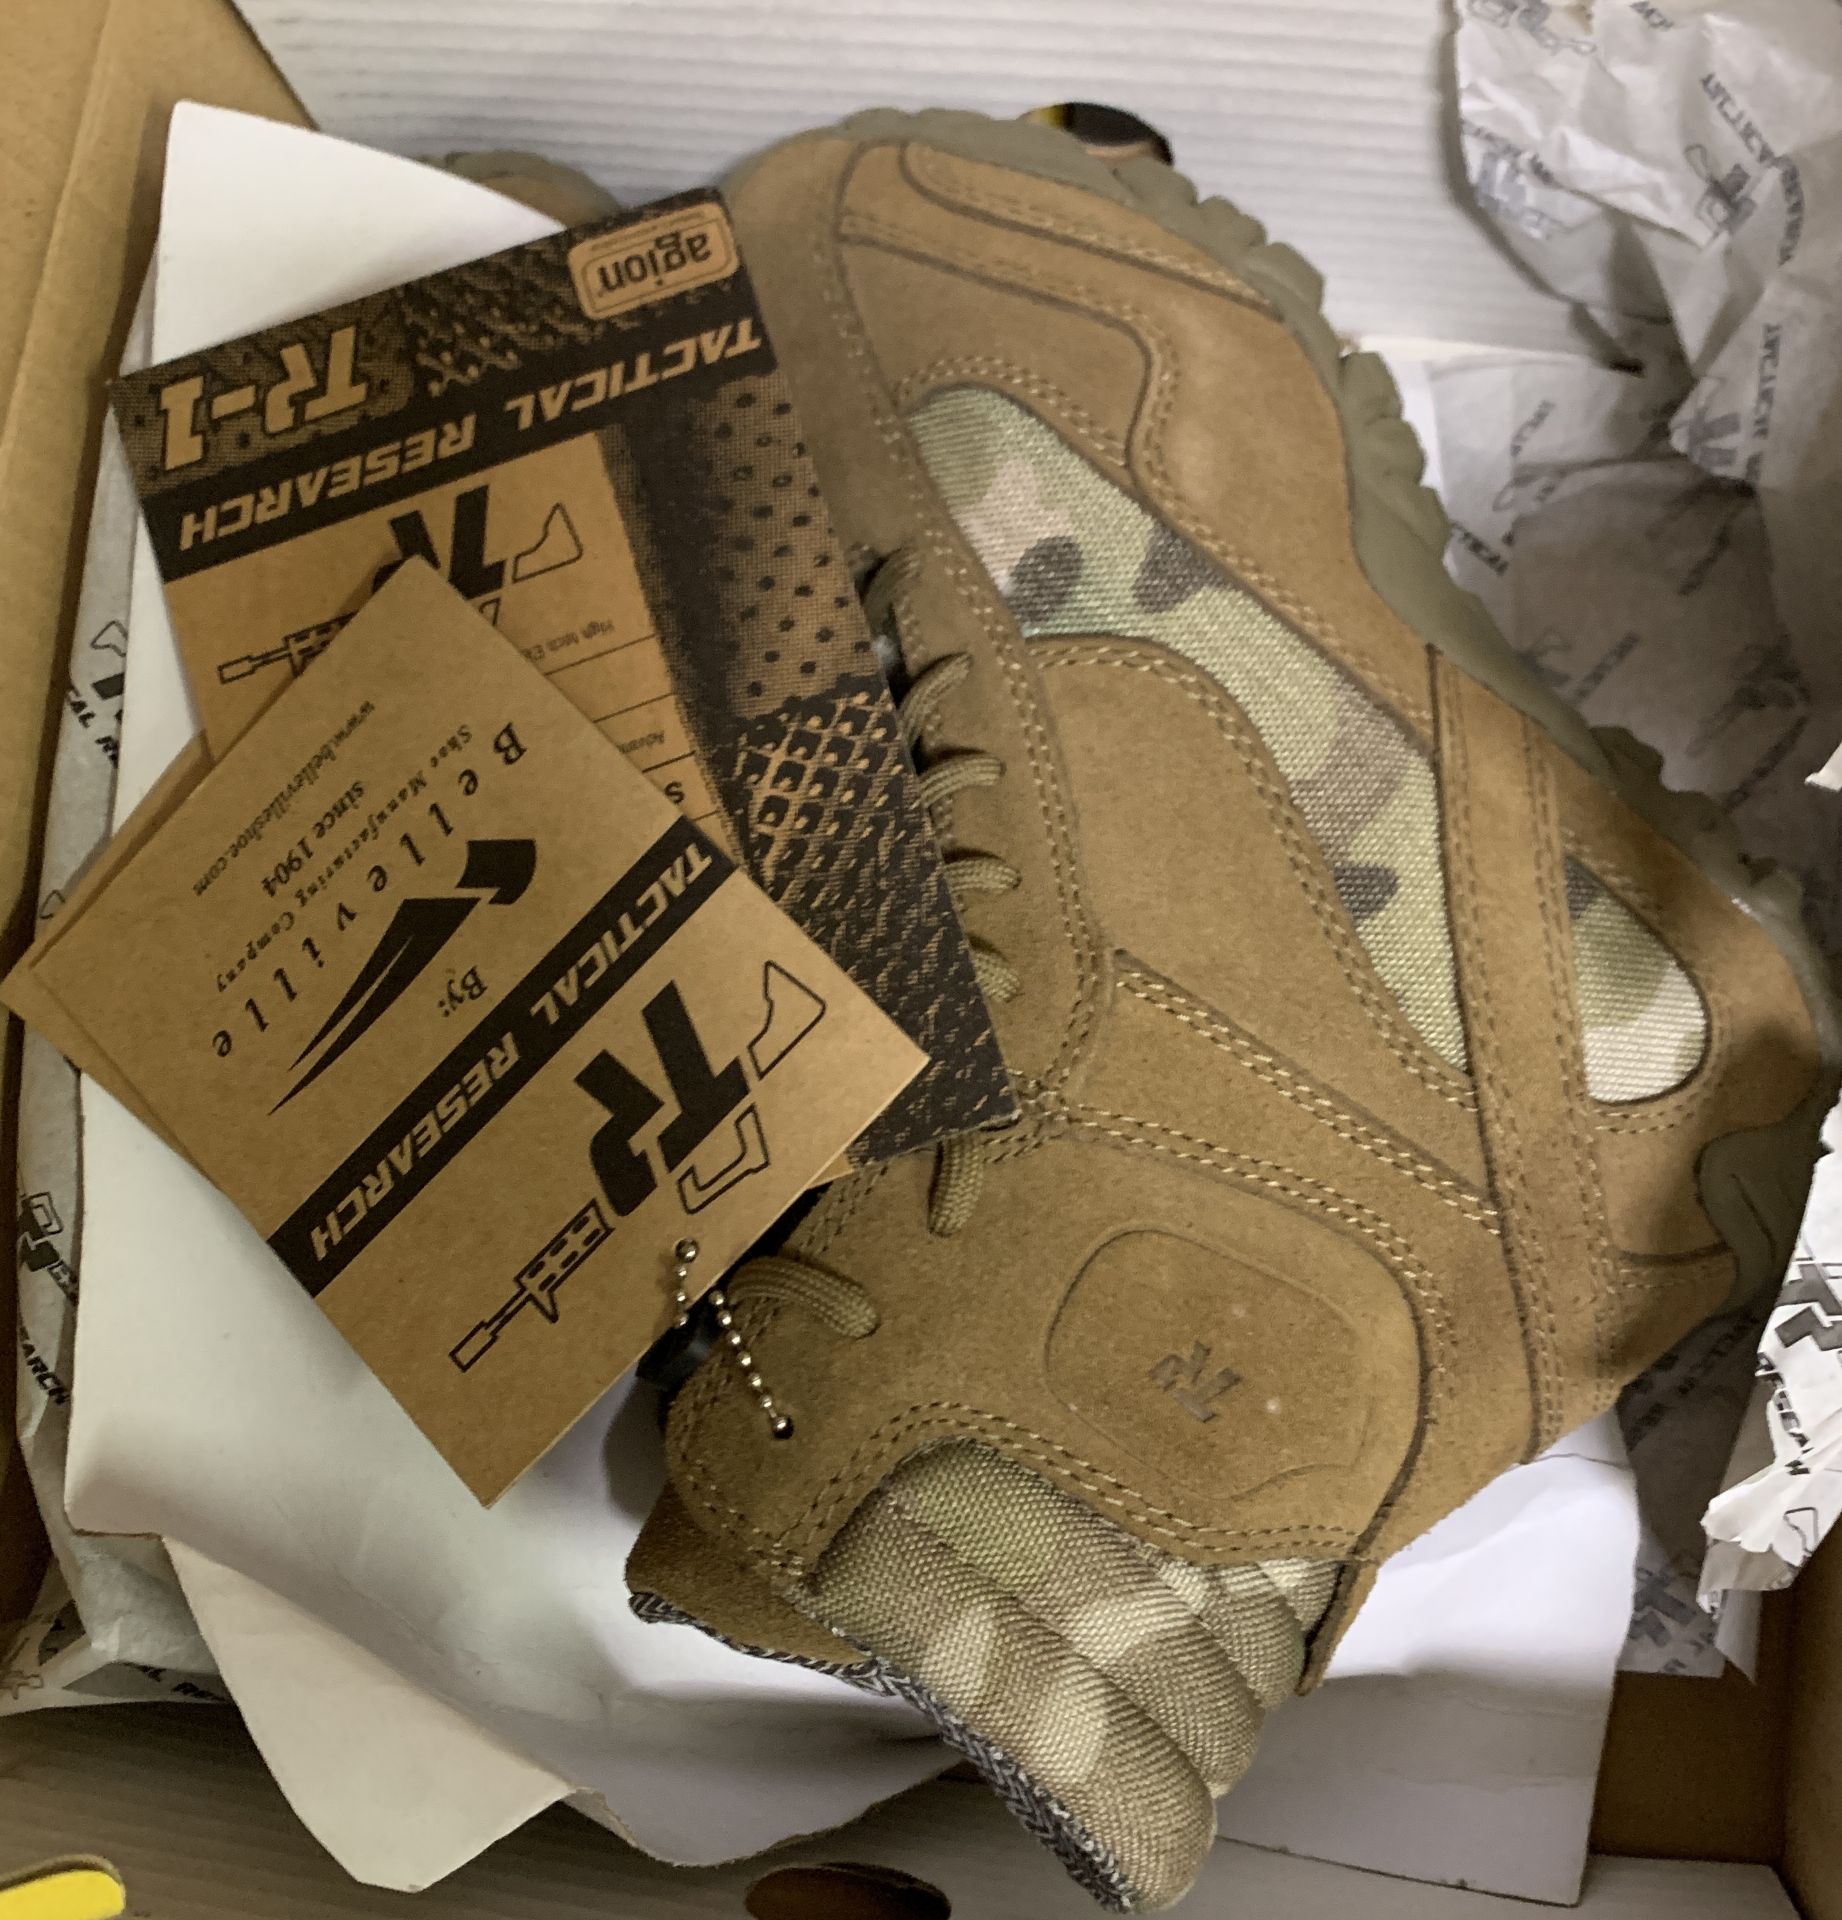 9 Pairs Belleville Tactical Boots TR505 Camo/Tan, Various Sizes, Retail Value $495+ - Image 3 of 3